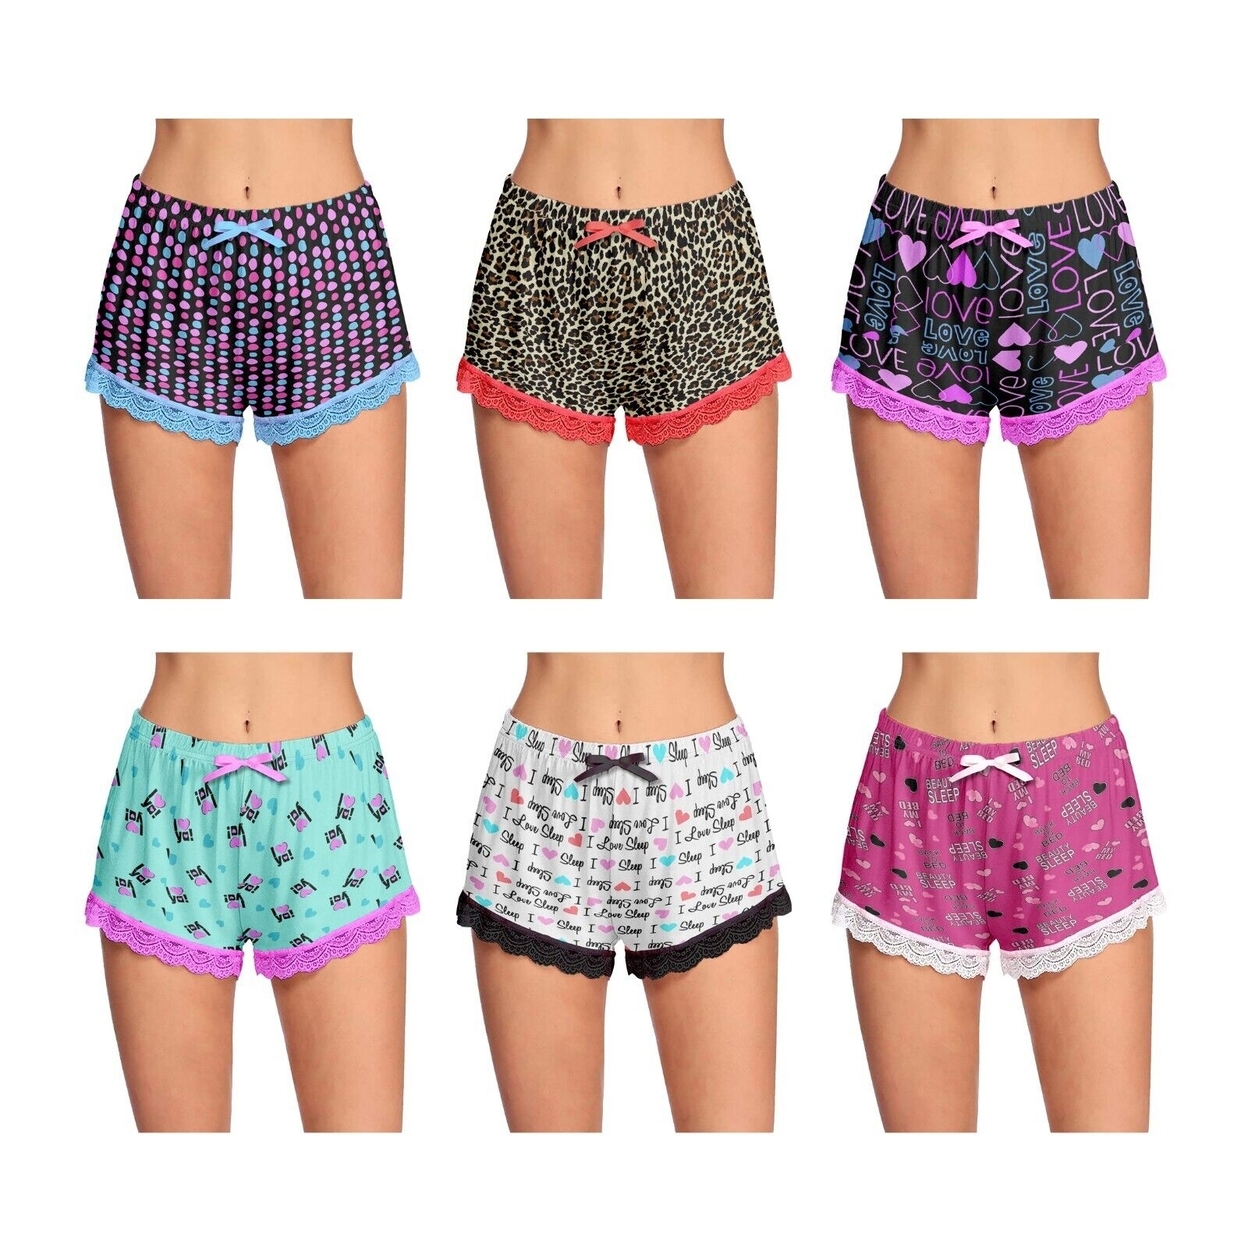 3-Pack: Women's Ultra-Soft Cozy Fun Printed Lace Trim Pajama Lounge Shorts - Small, Shapes